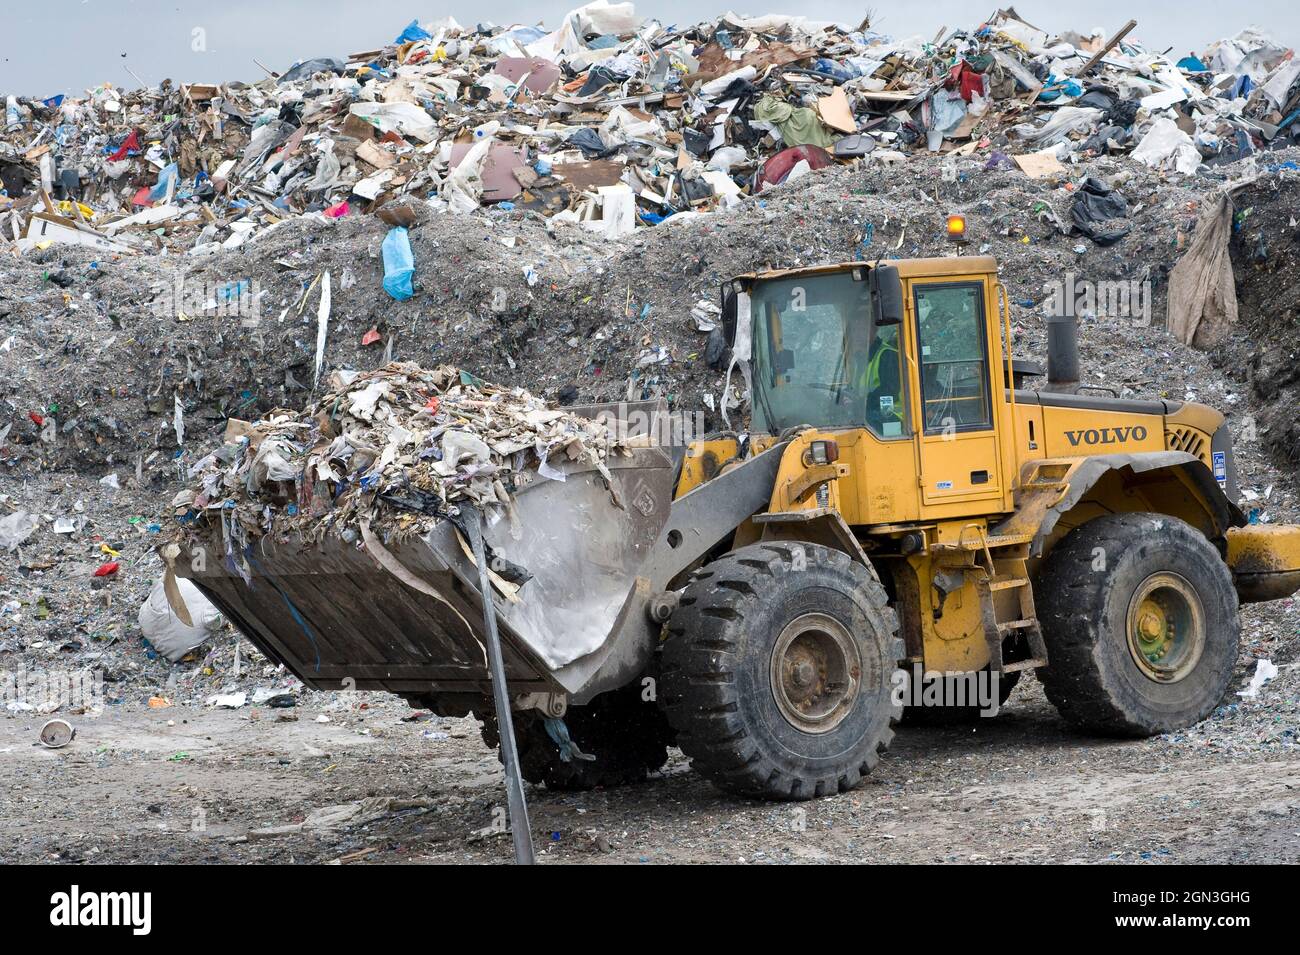 Volvo wheeled loader working at a materials recycling facility in the UK. Stock Photo